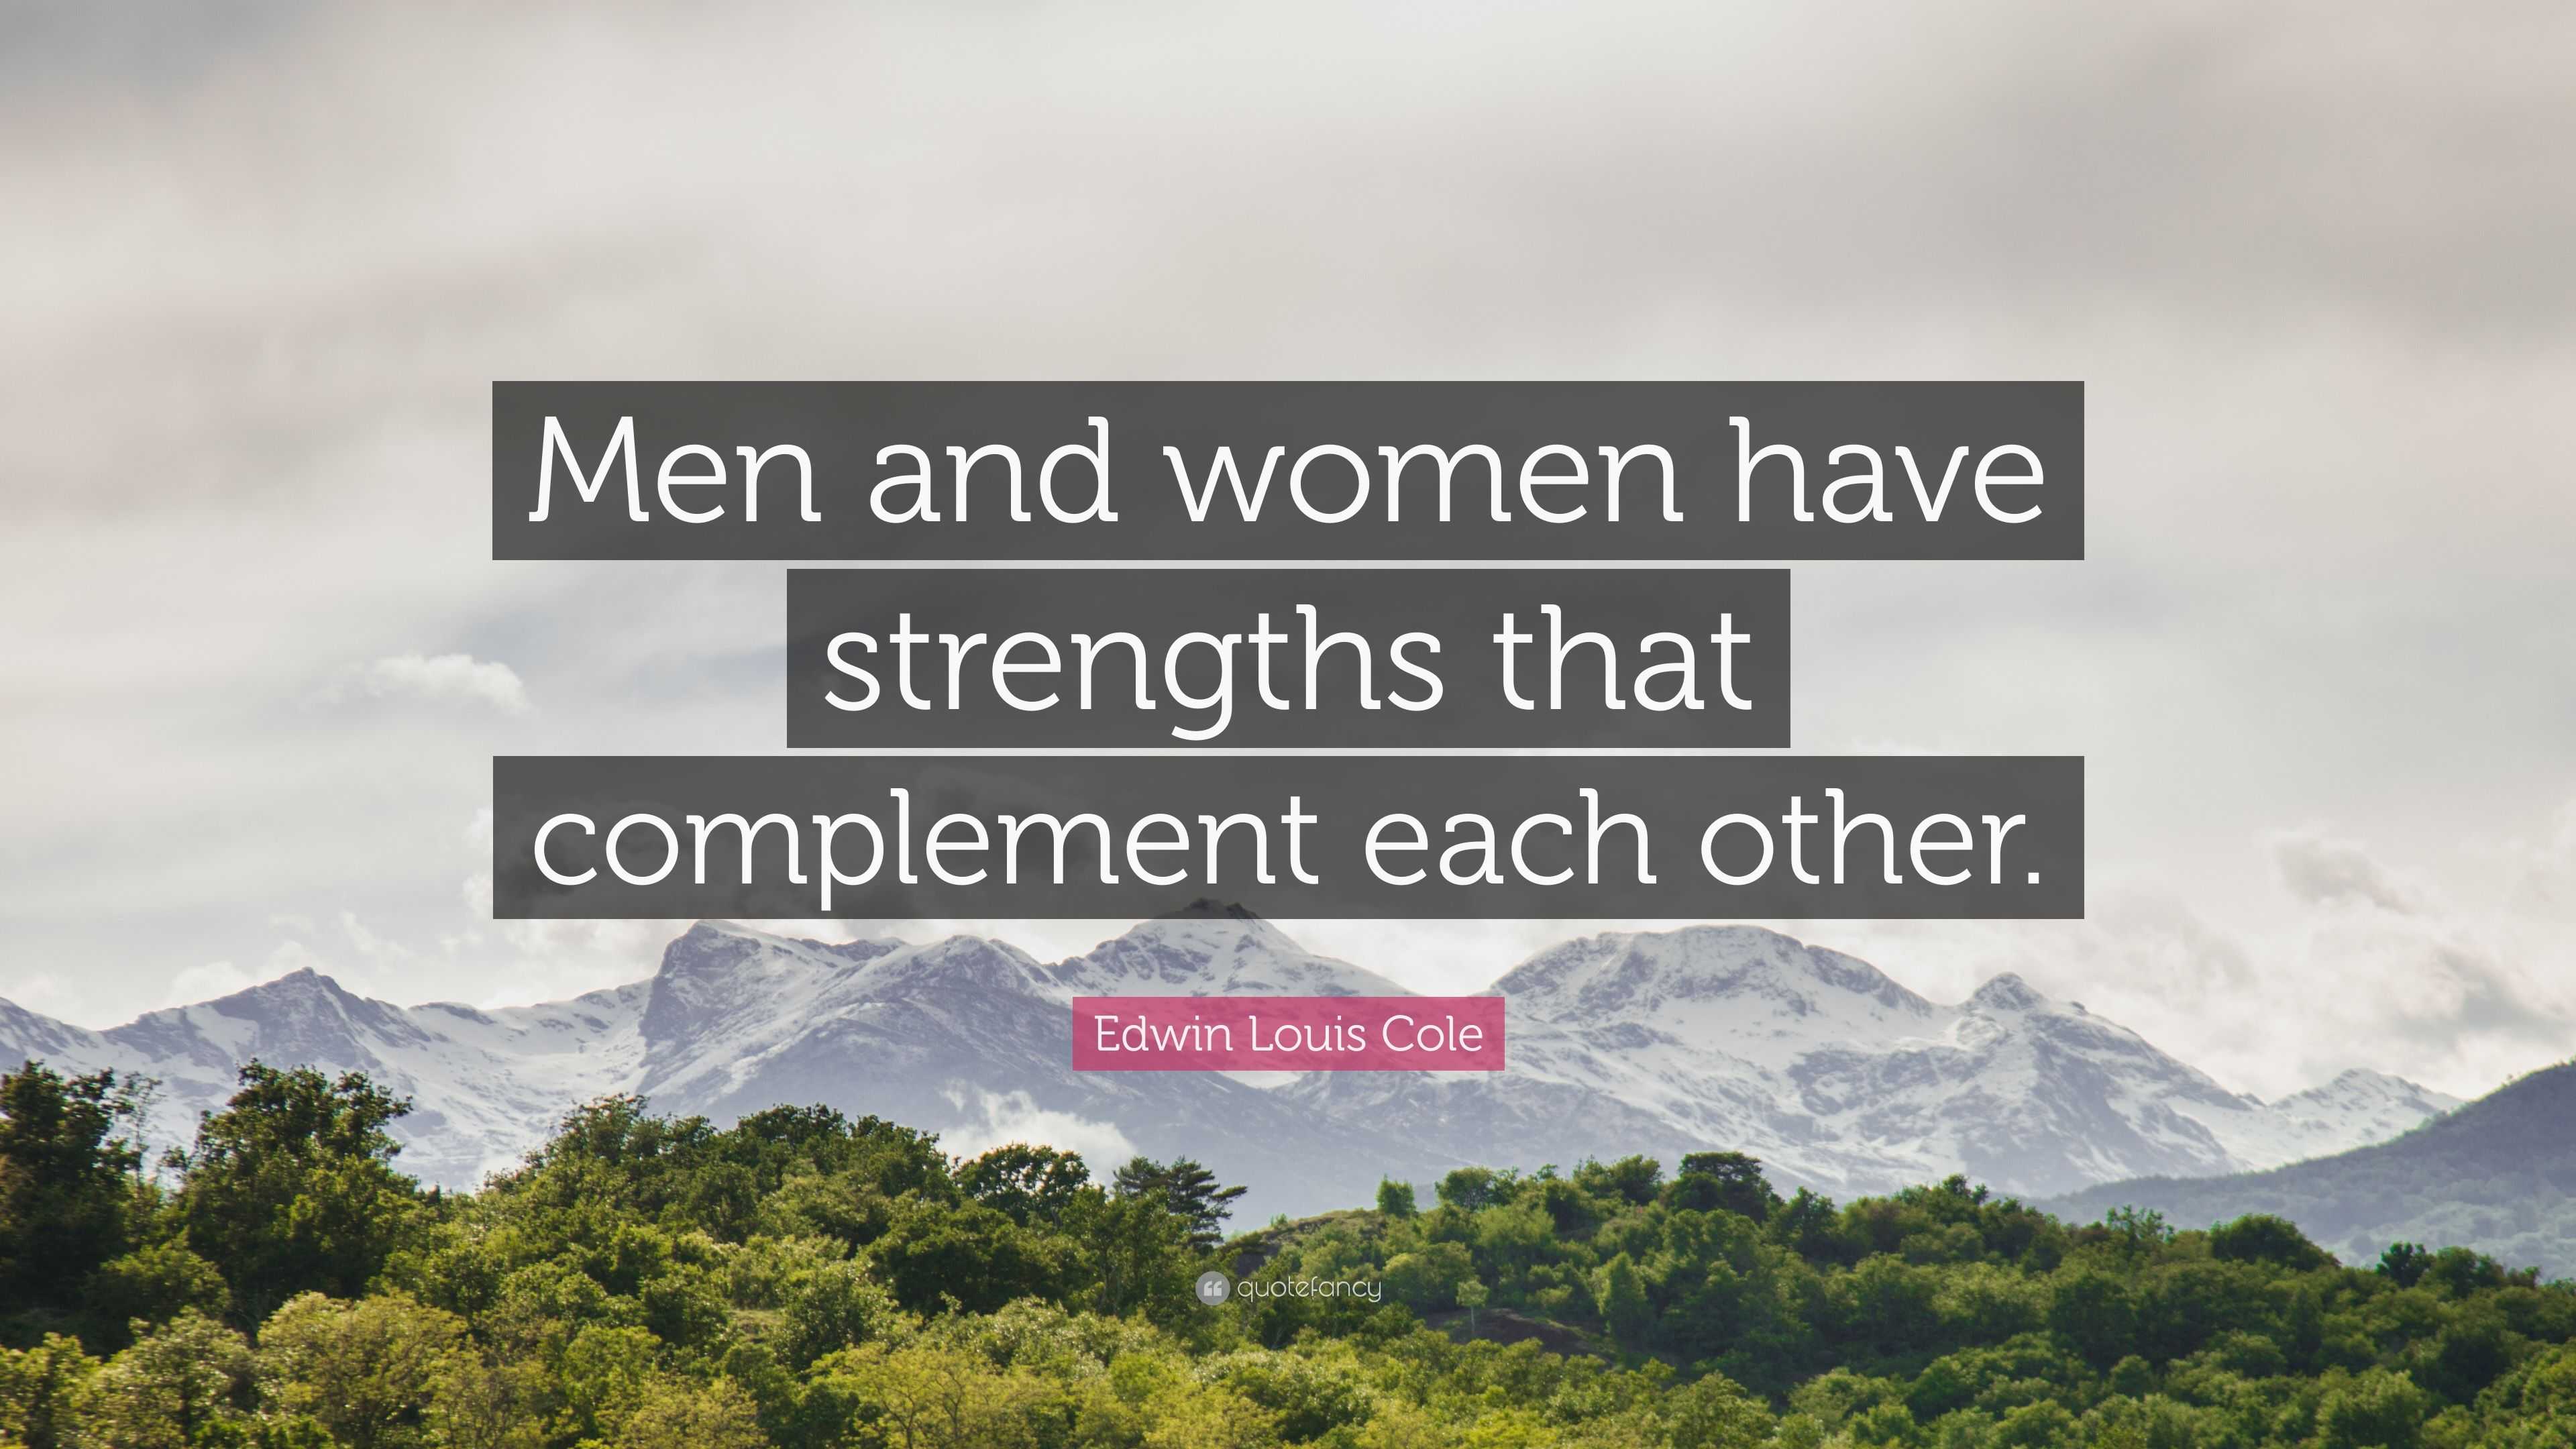 Edwin Louis Cole - Men and women have strengths that